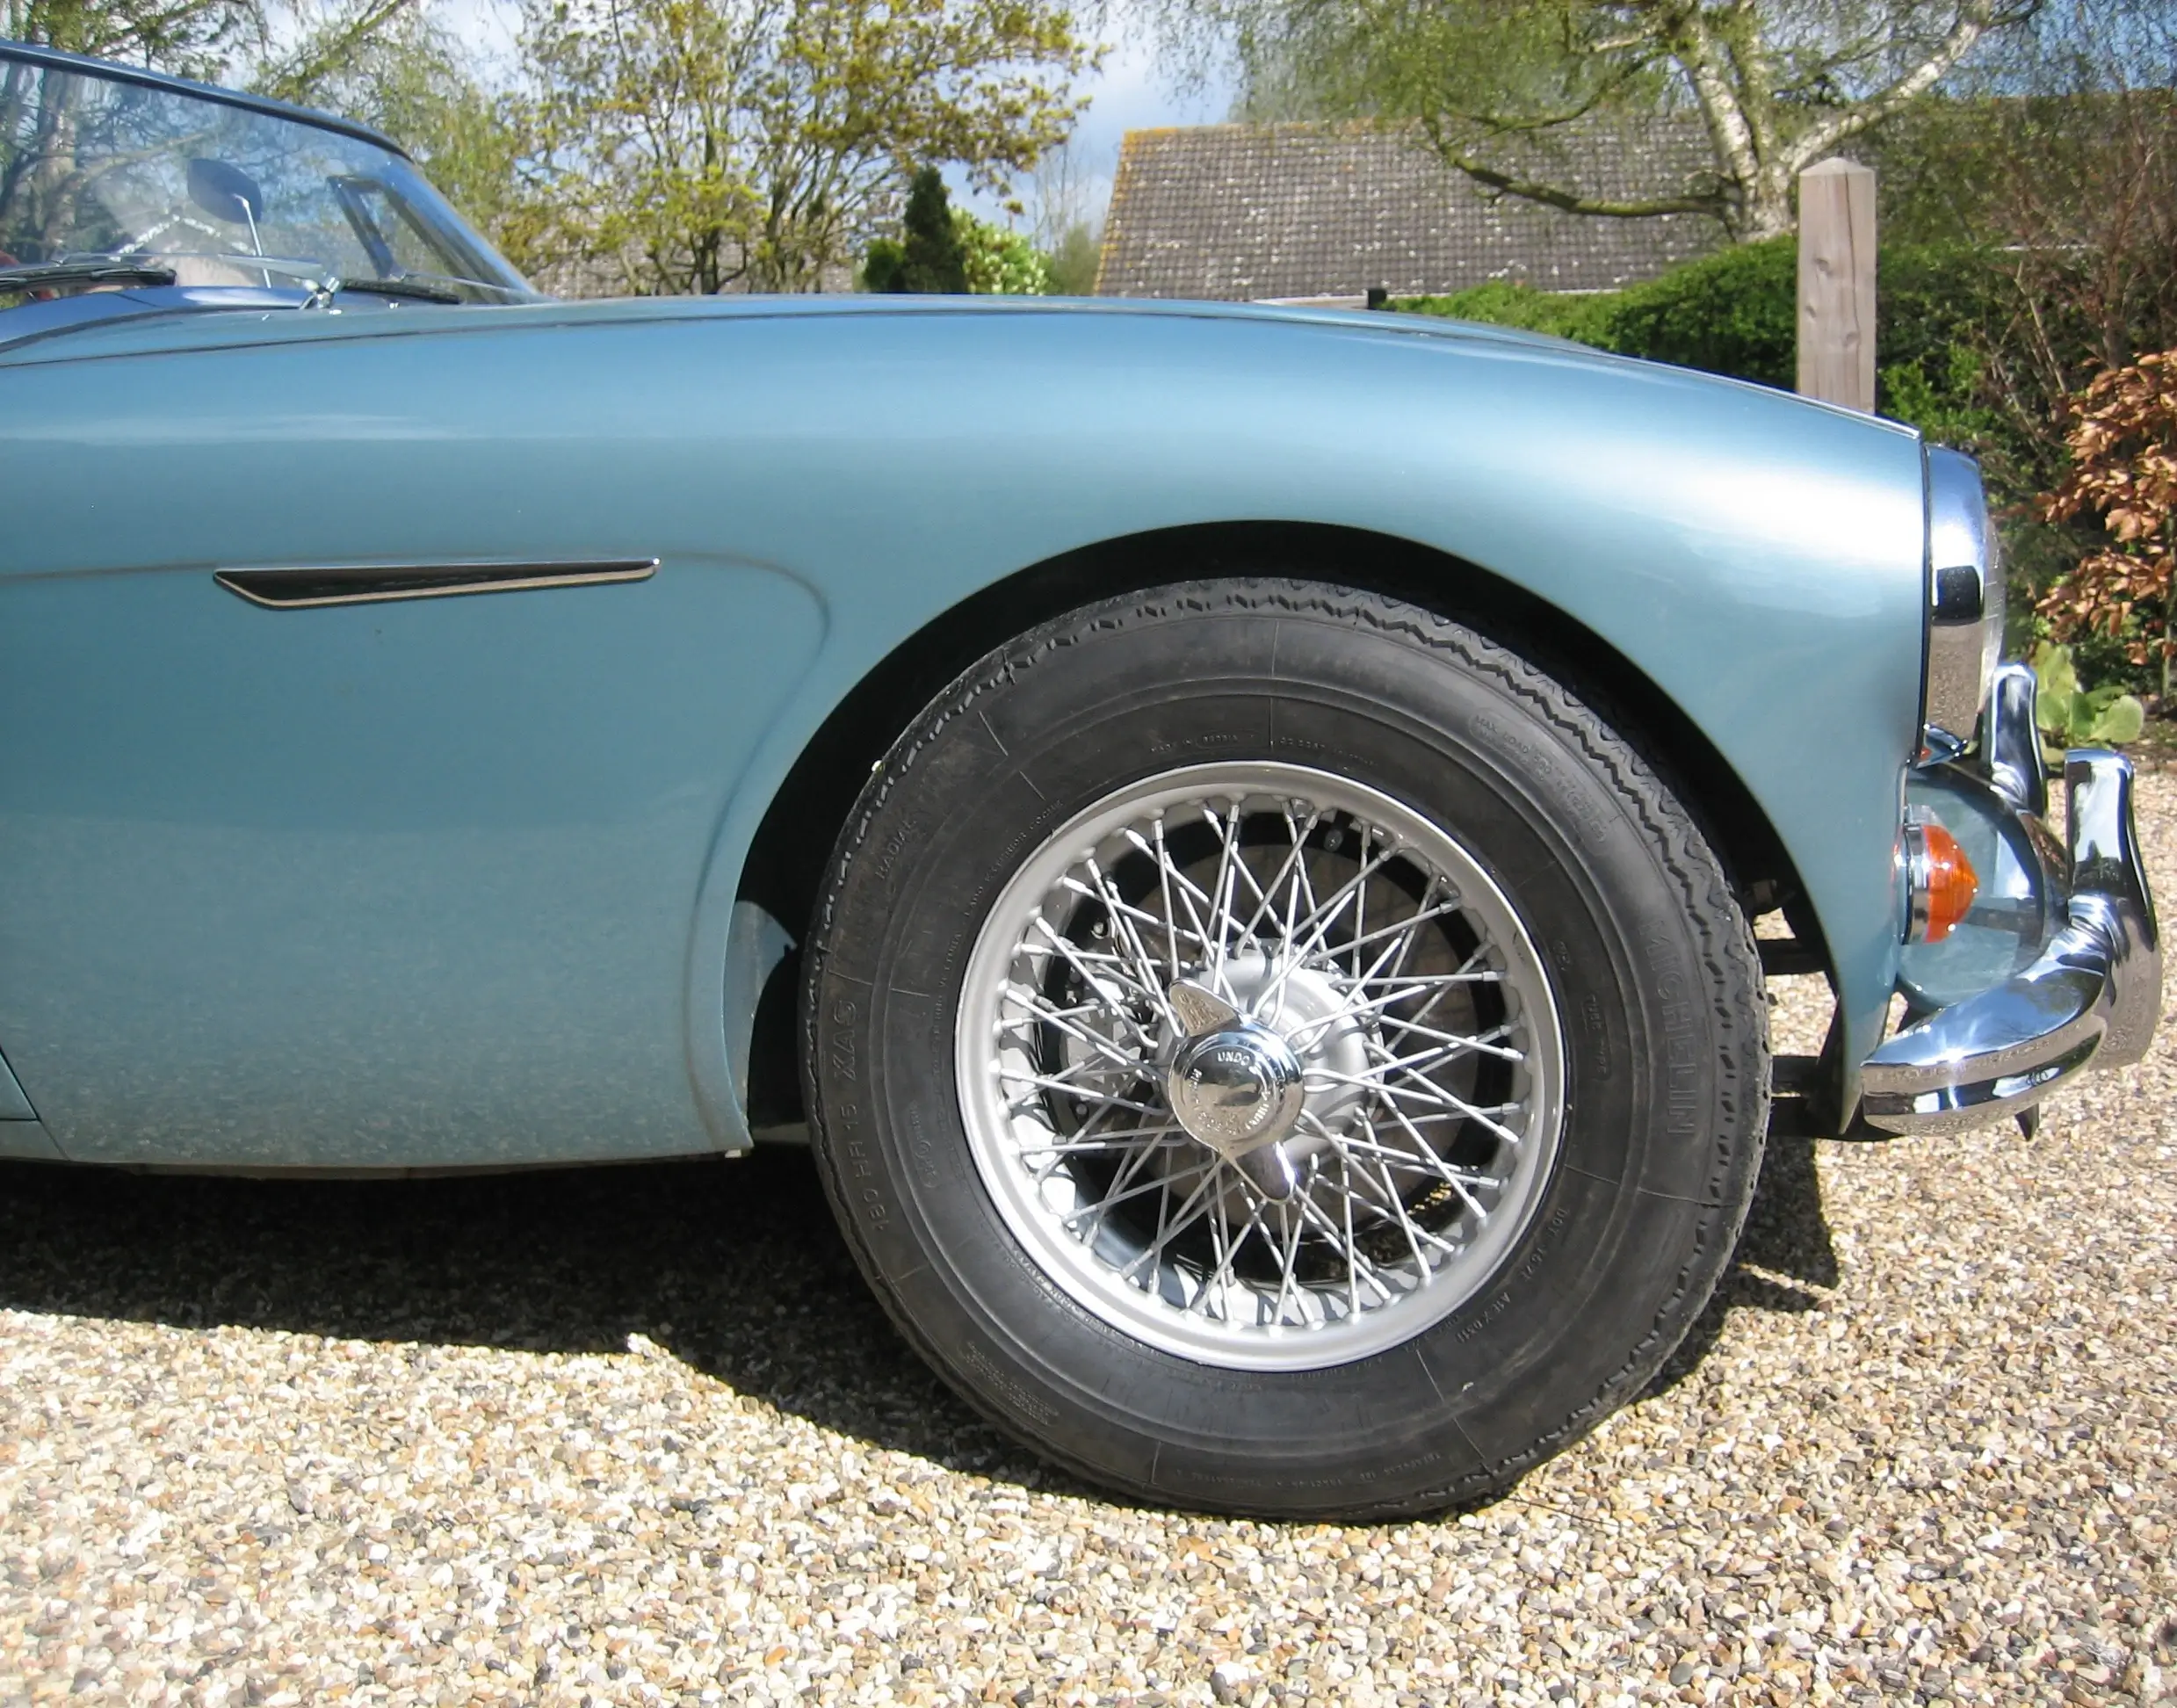 Austin Healey 3000 tyres side-view